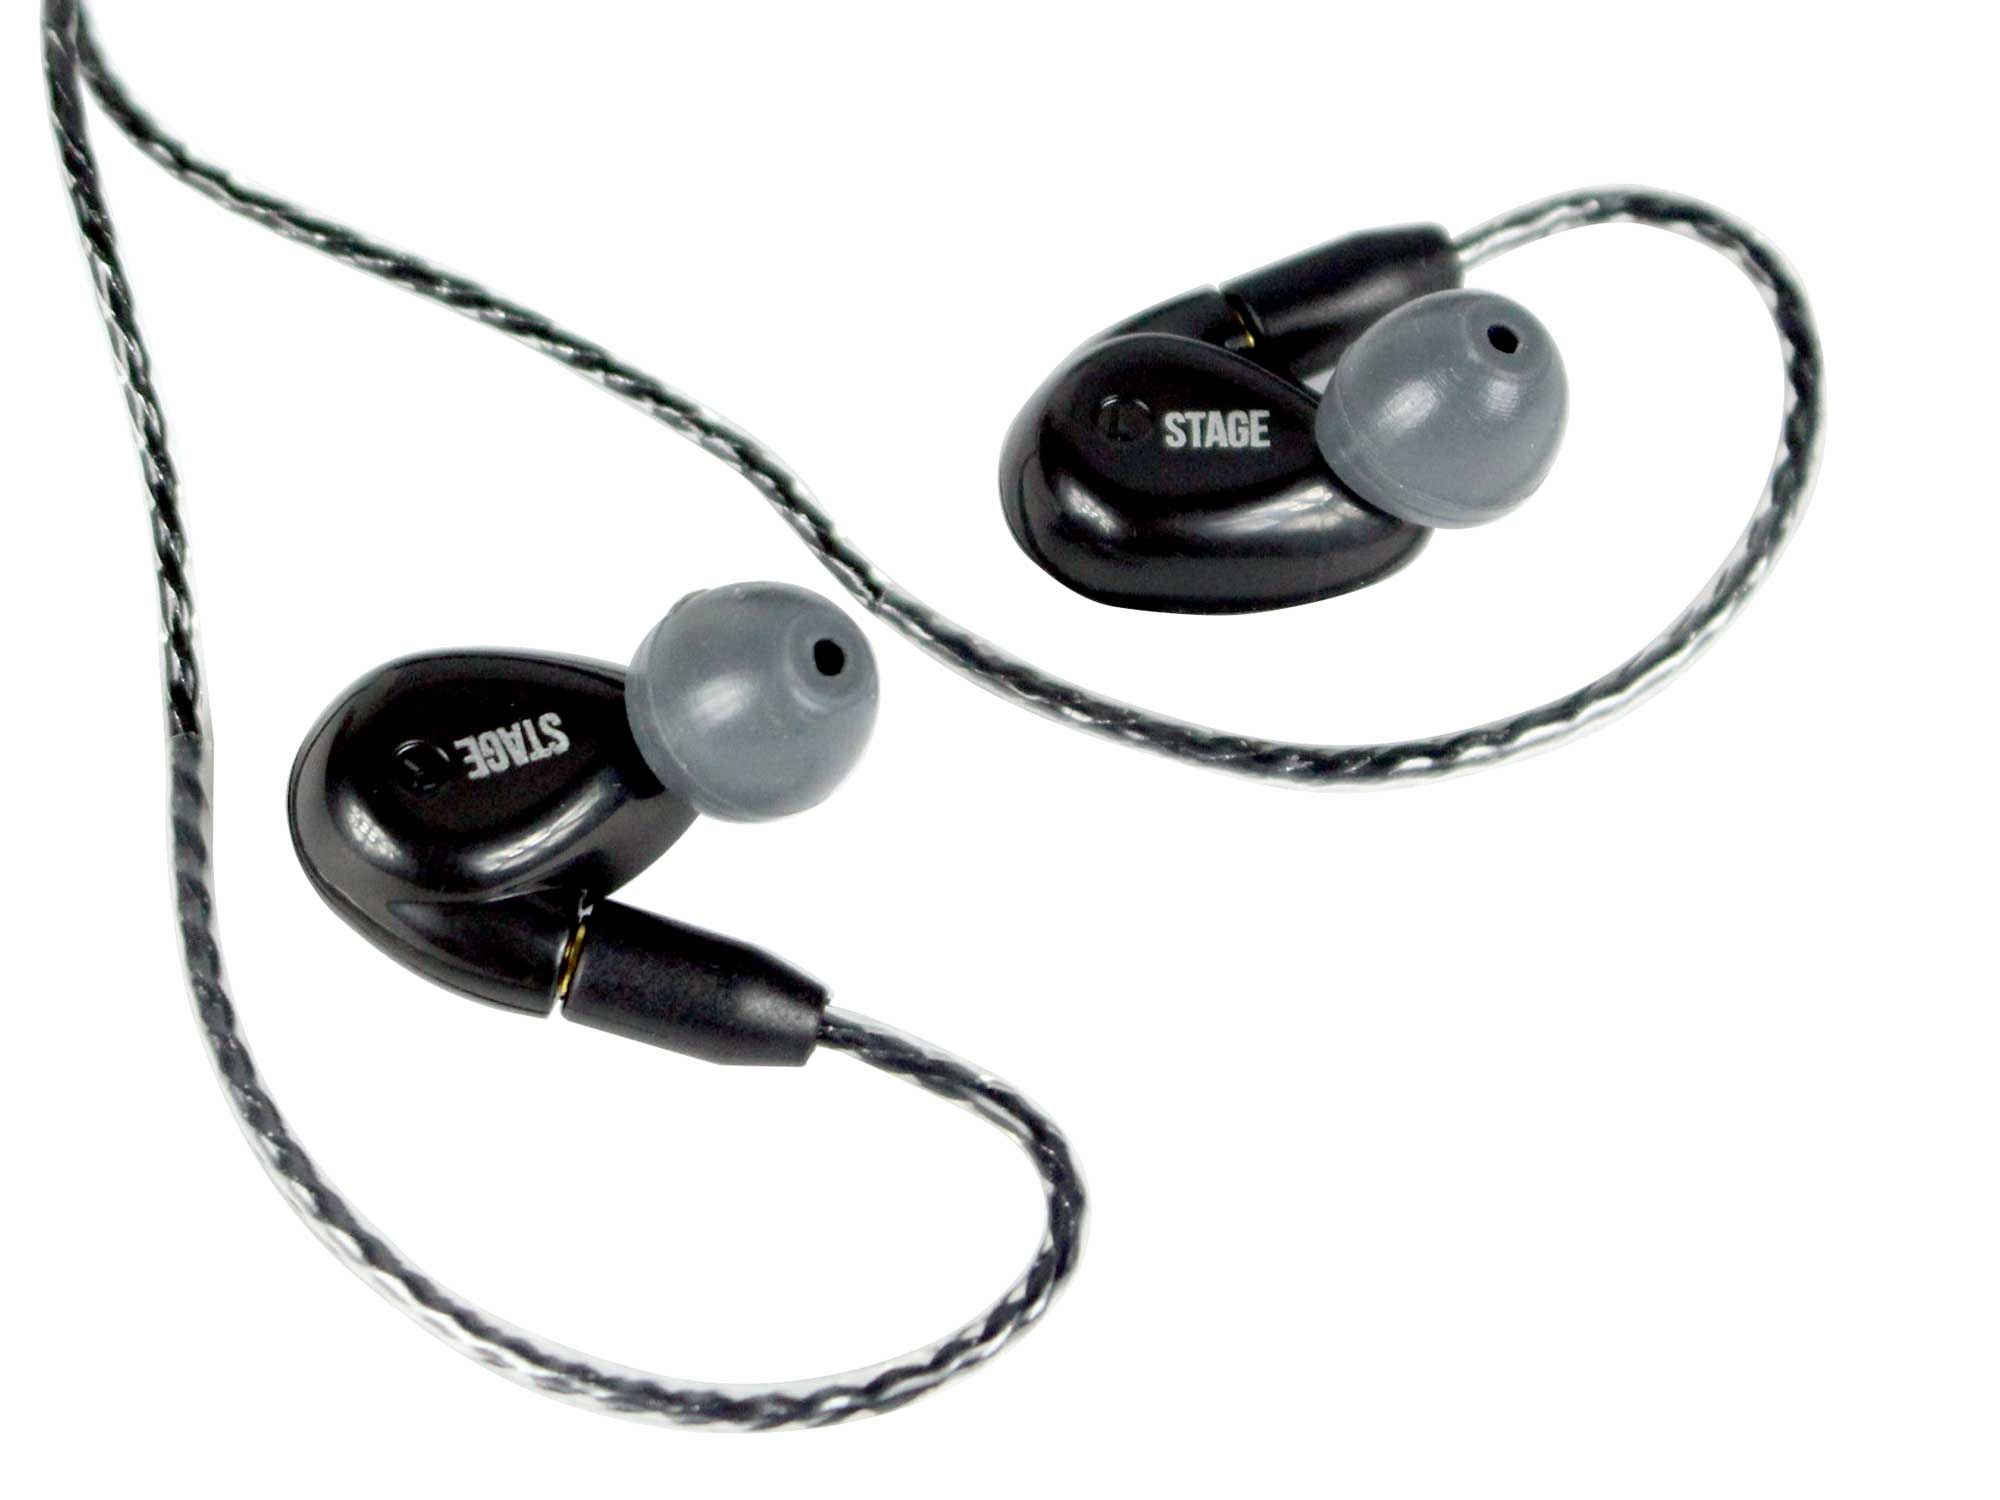 Fone In-Ear Preto 1 Microdriver 117dB XTREME EARS STAGE